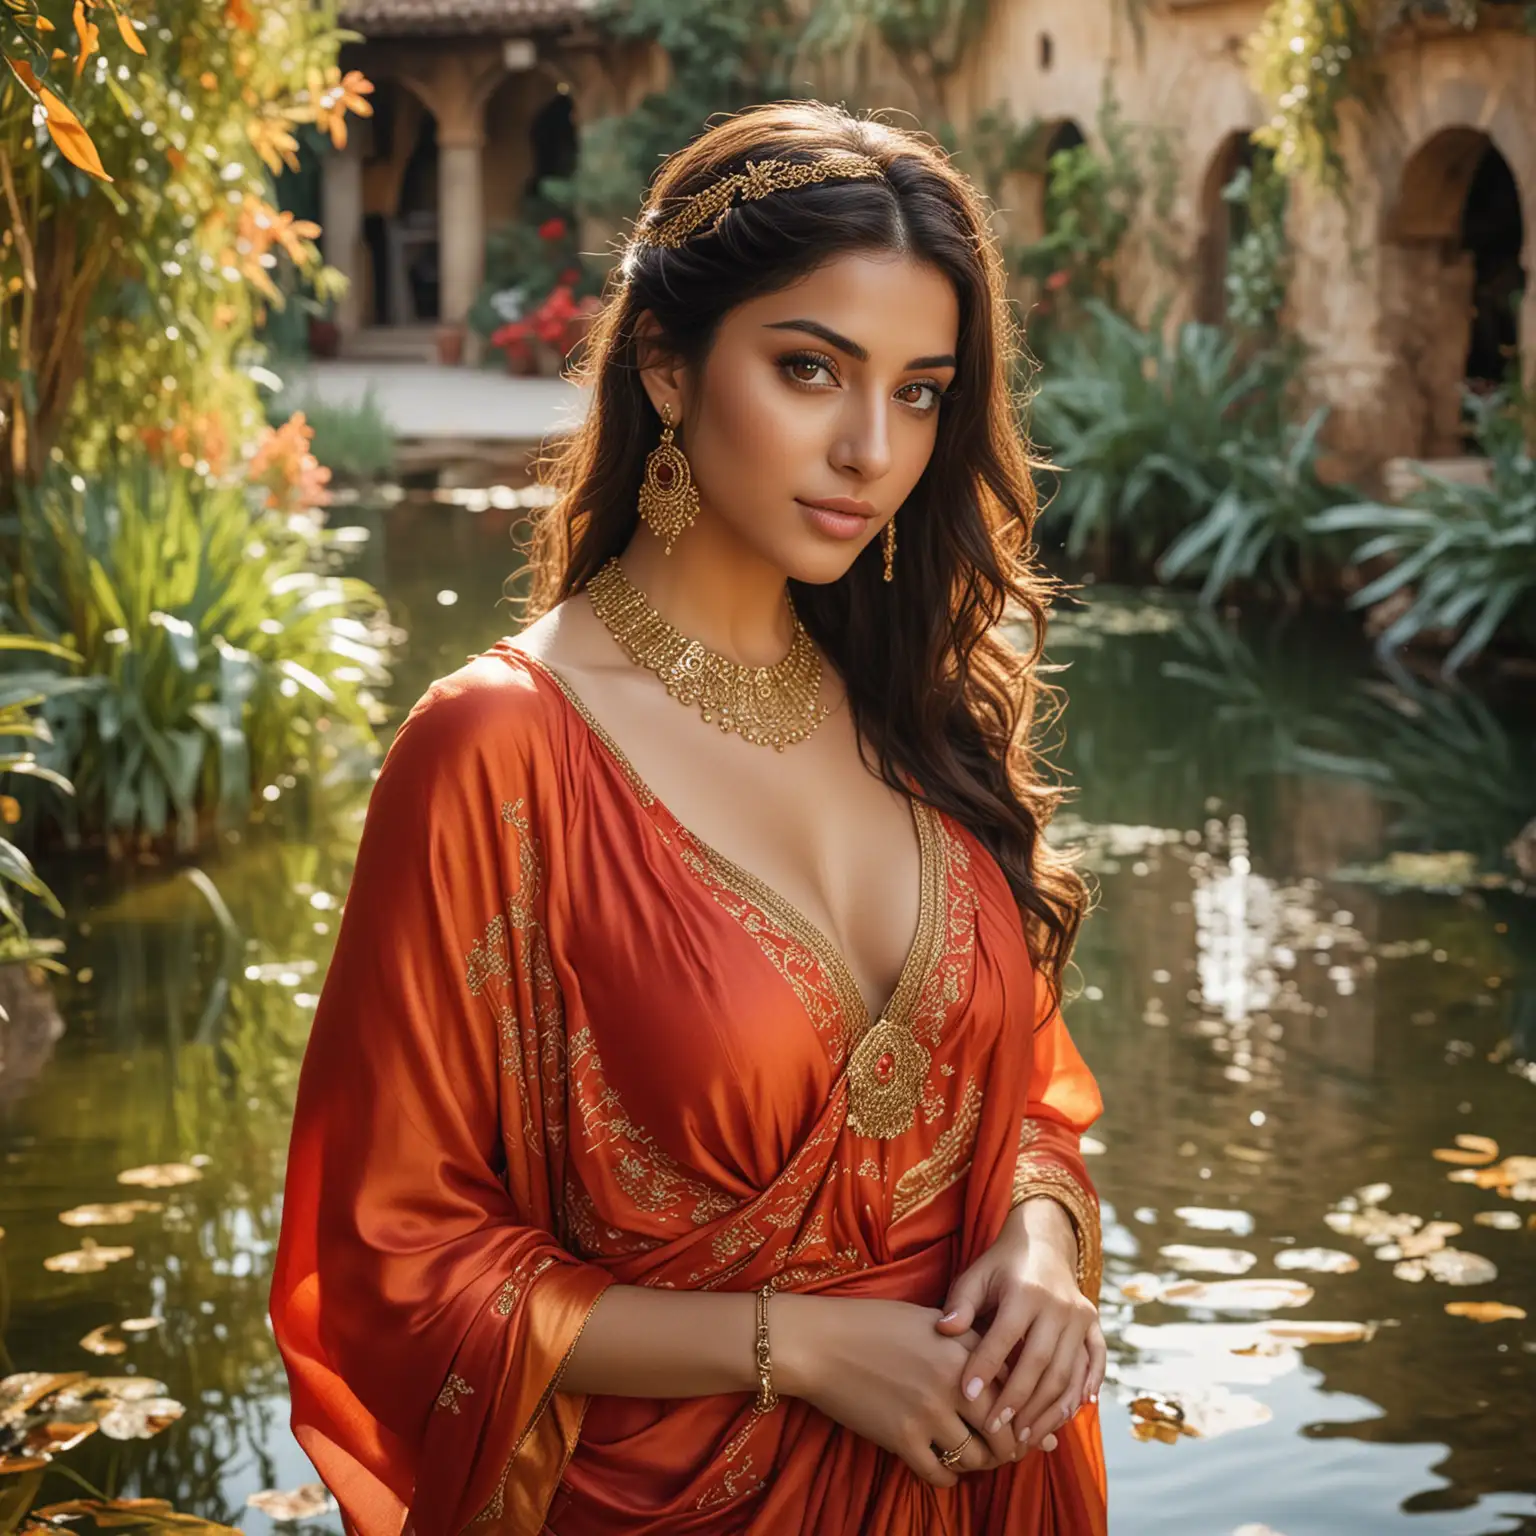 Mediterranean Water Garden Arab Woman in Ornate Silk Toga Gown and Gold Jewelry